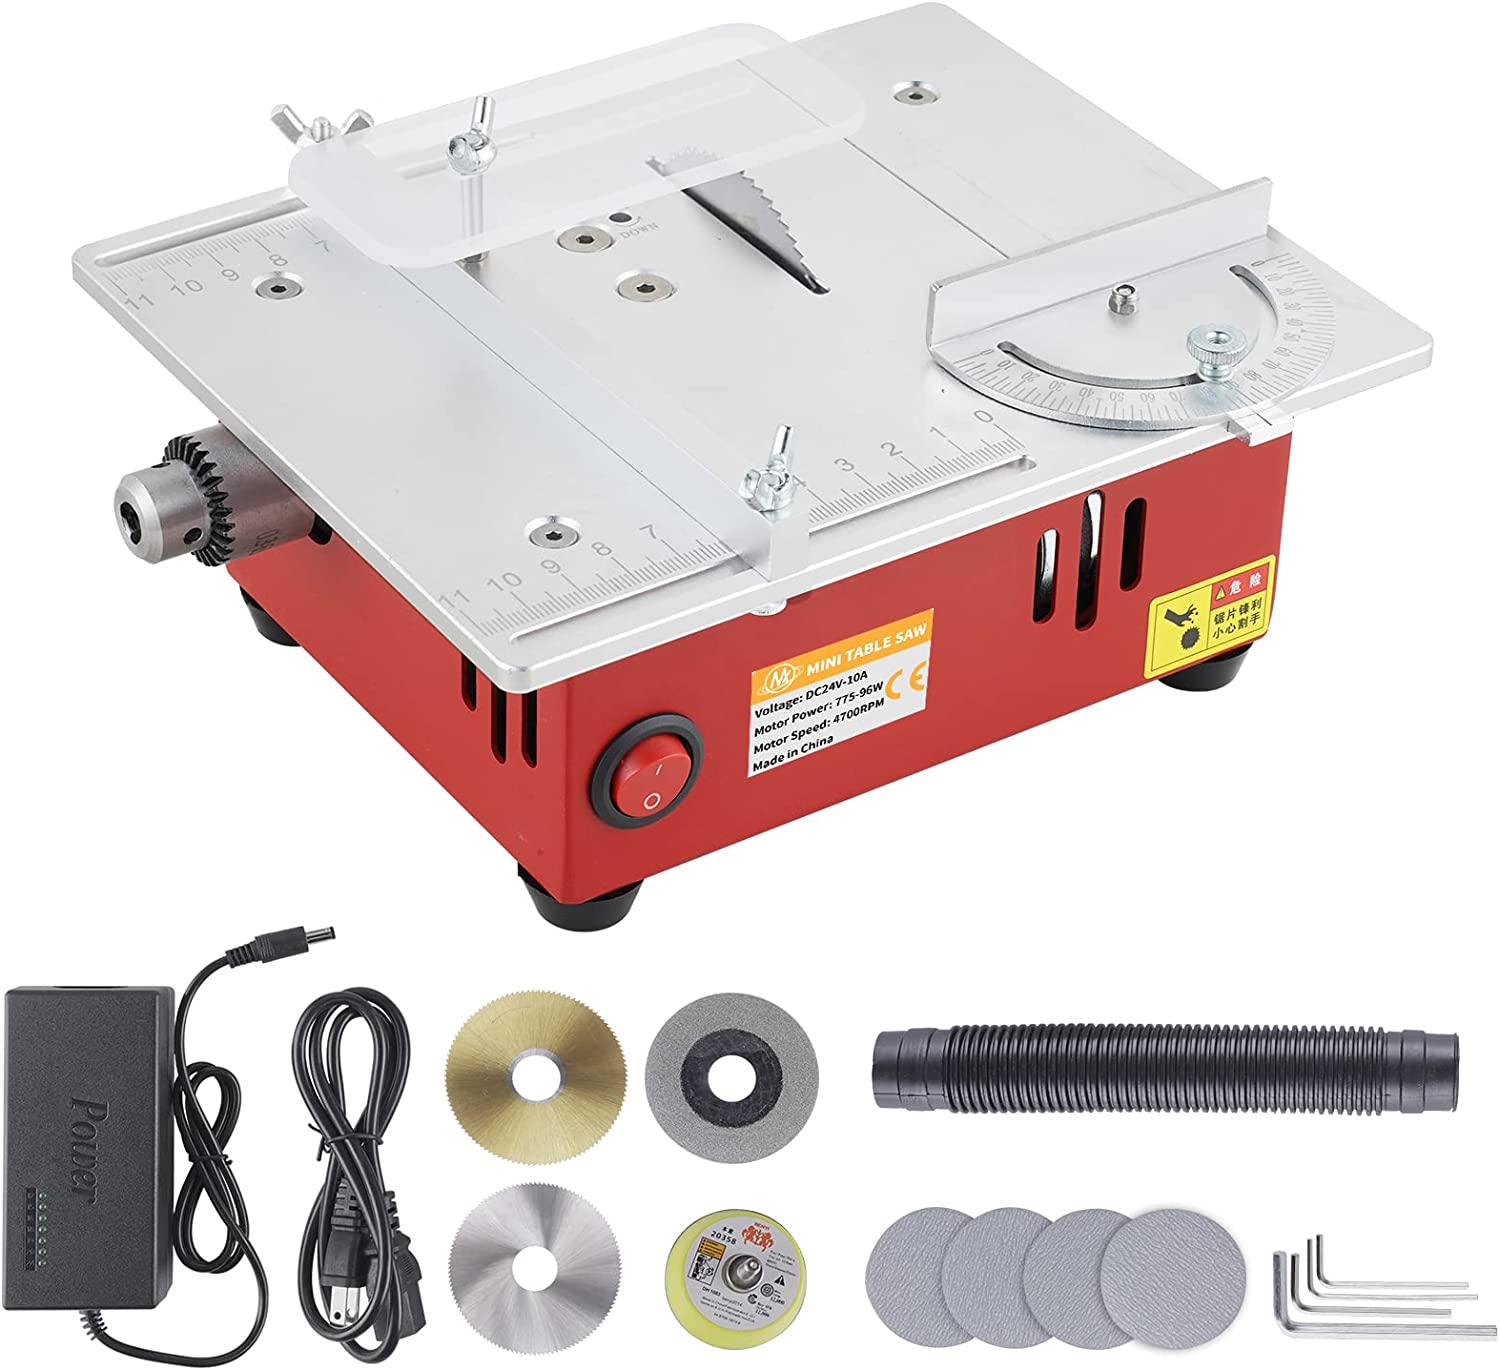 hobby table saw review